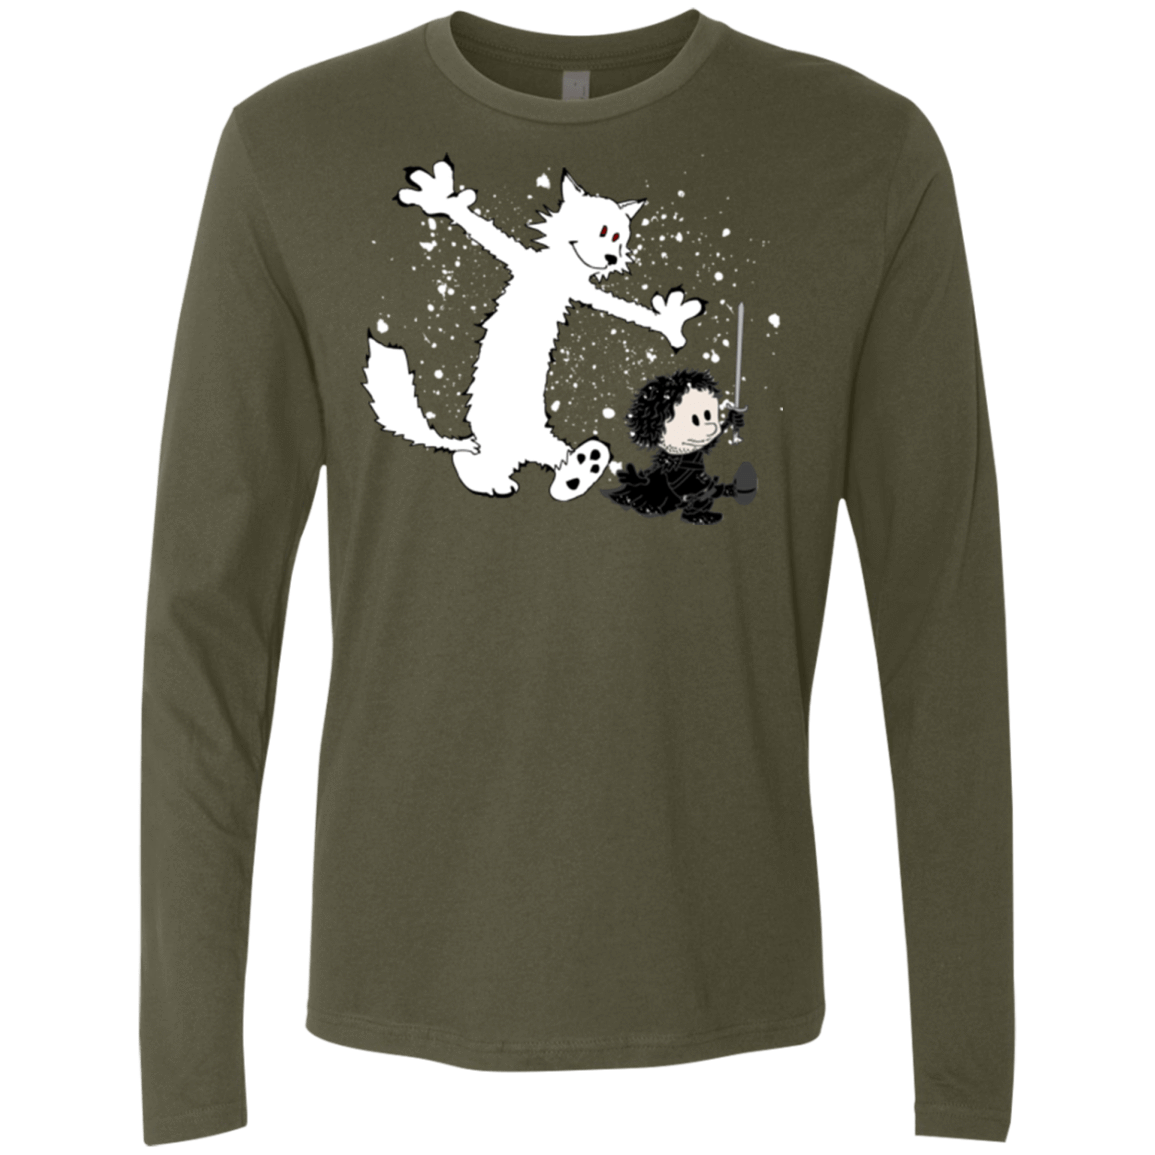 T-Shirts Military Green / Small Ghost And Snow Men's Premium Long Sleeve